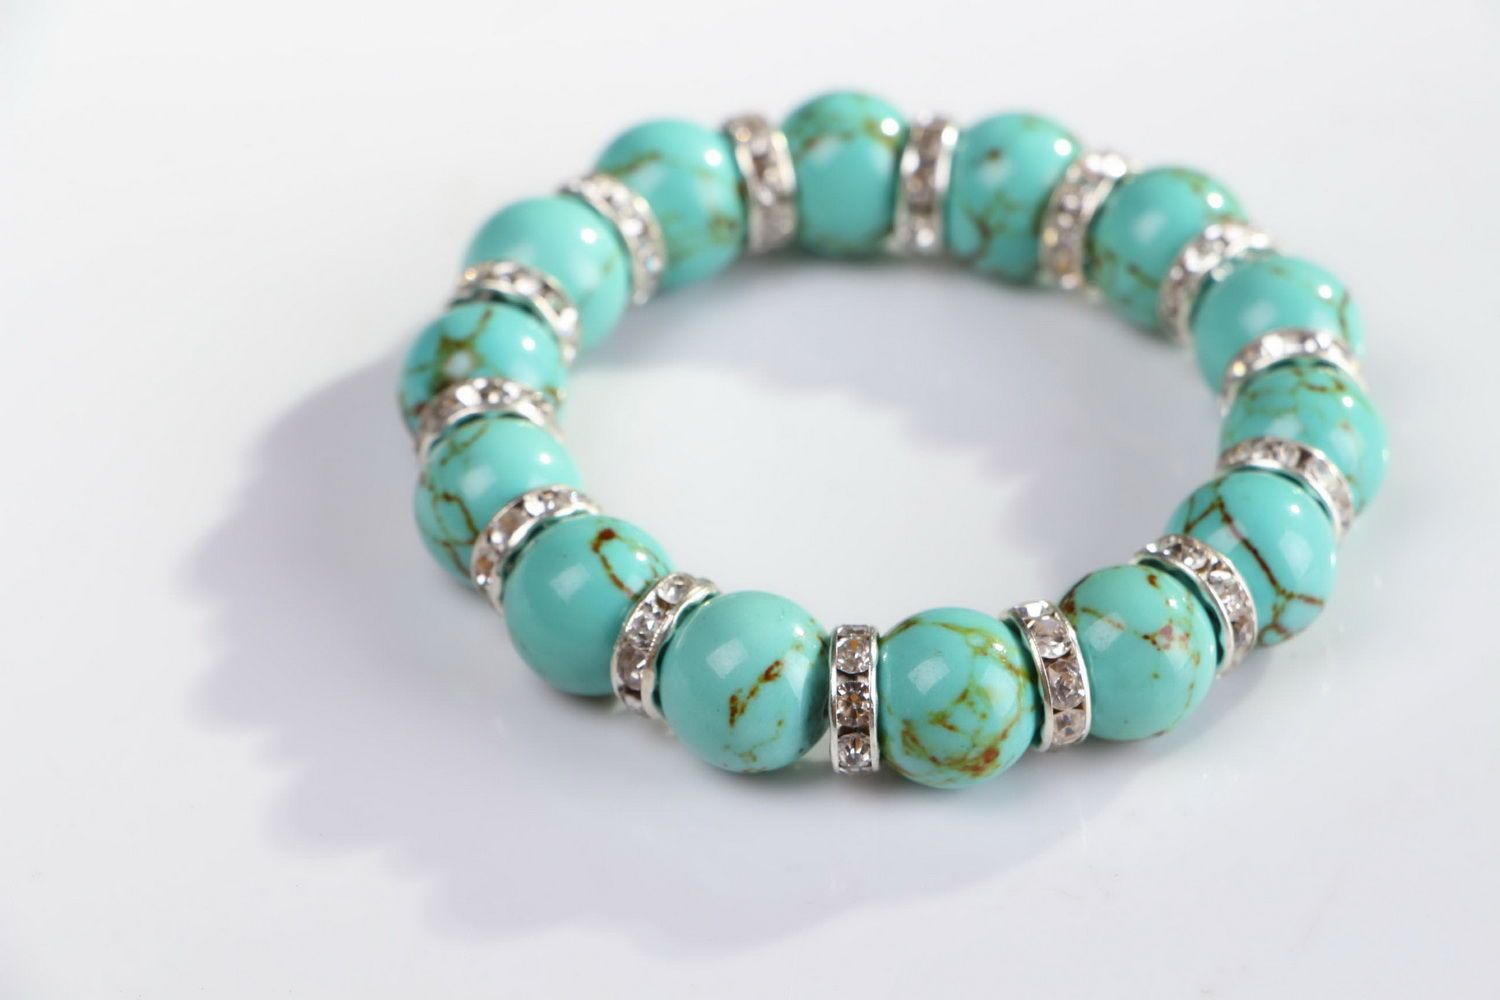 Bracelet made from turquoise with elastic band photo 1